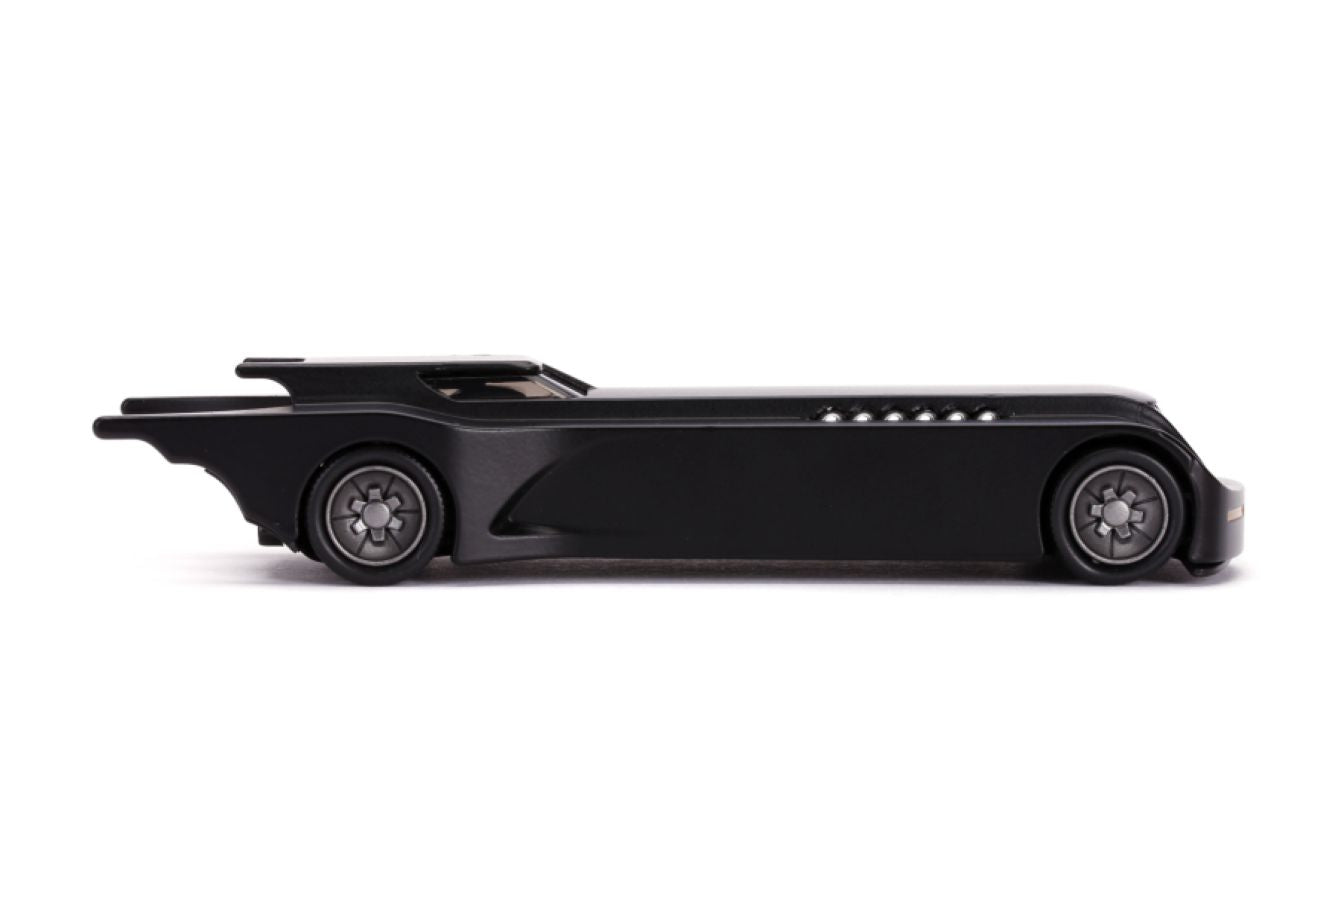 Batman: The Animated Series - Batmobile with Figure 1:32 Scale Hollywood Ride